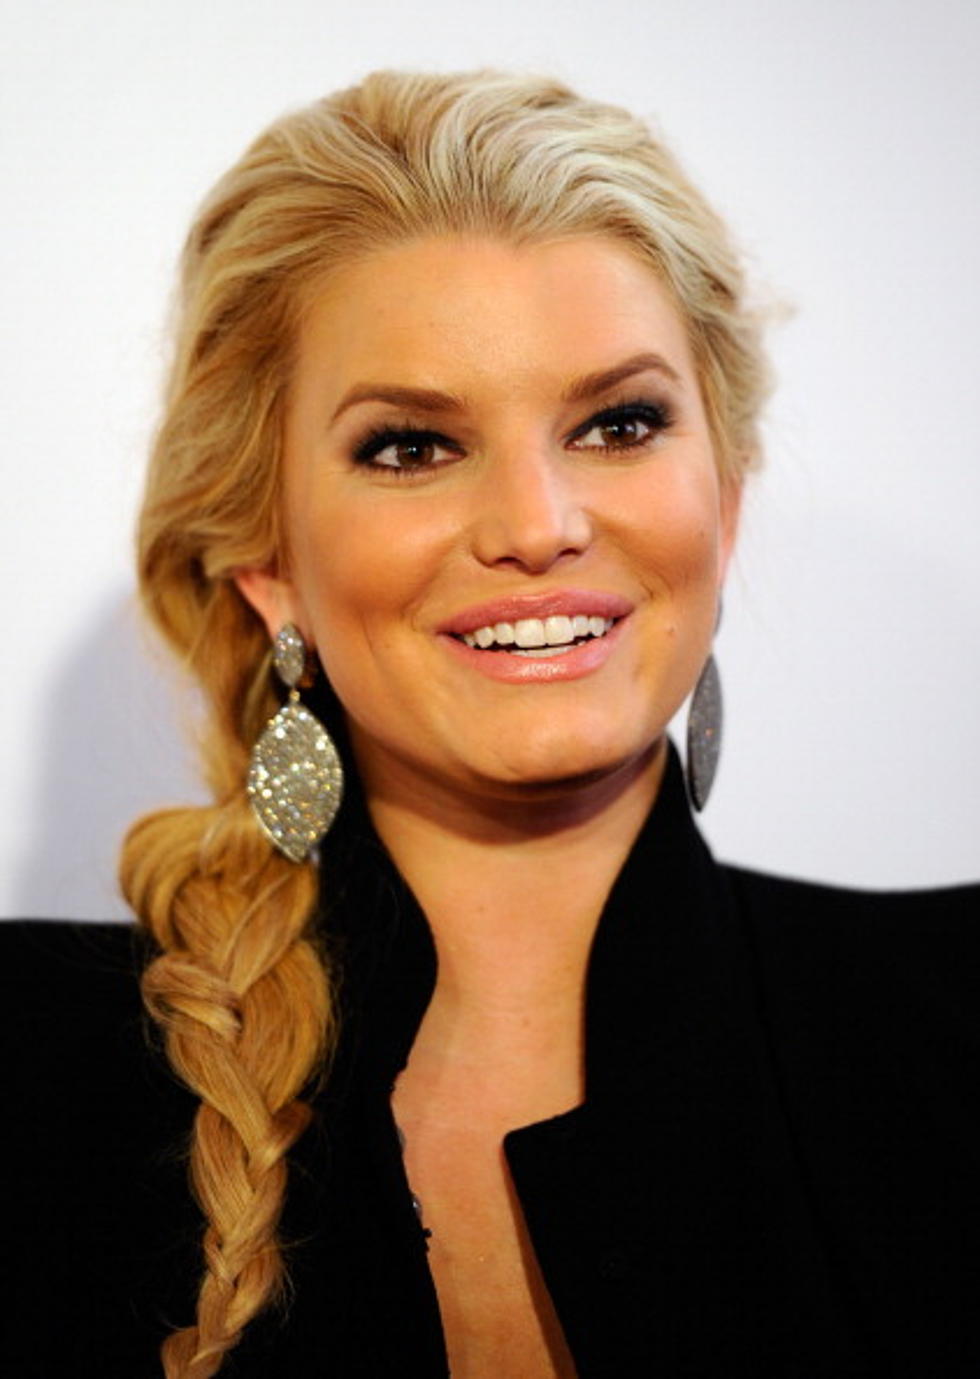 Jessica Simpson Approached for ‘X Factor’